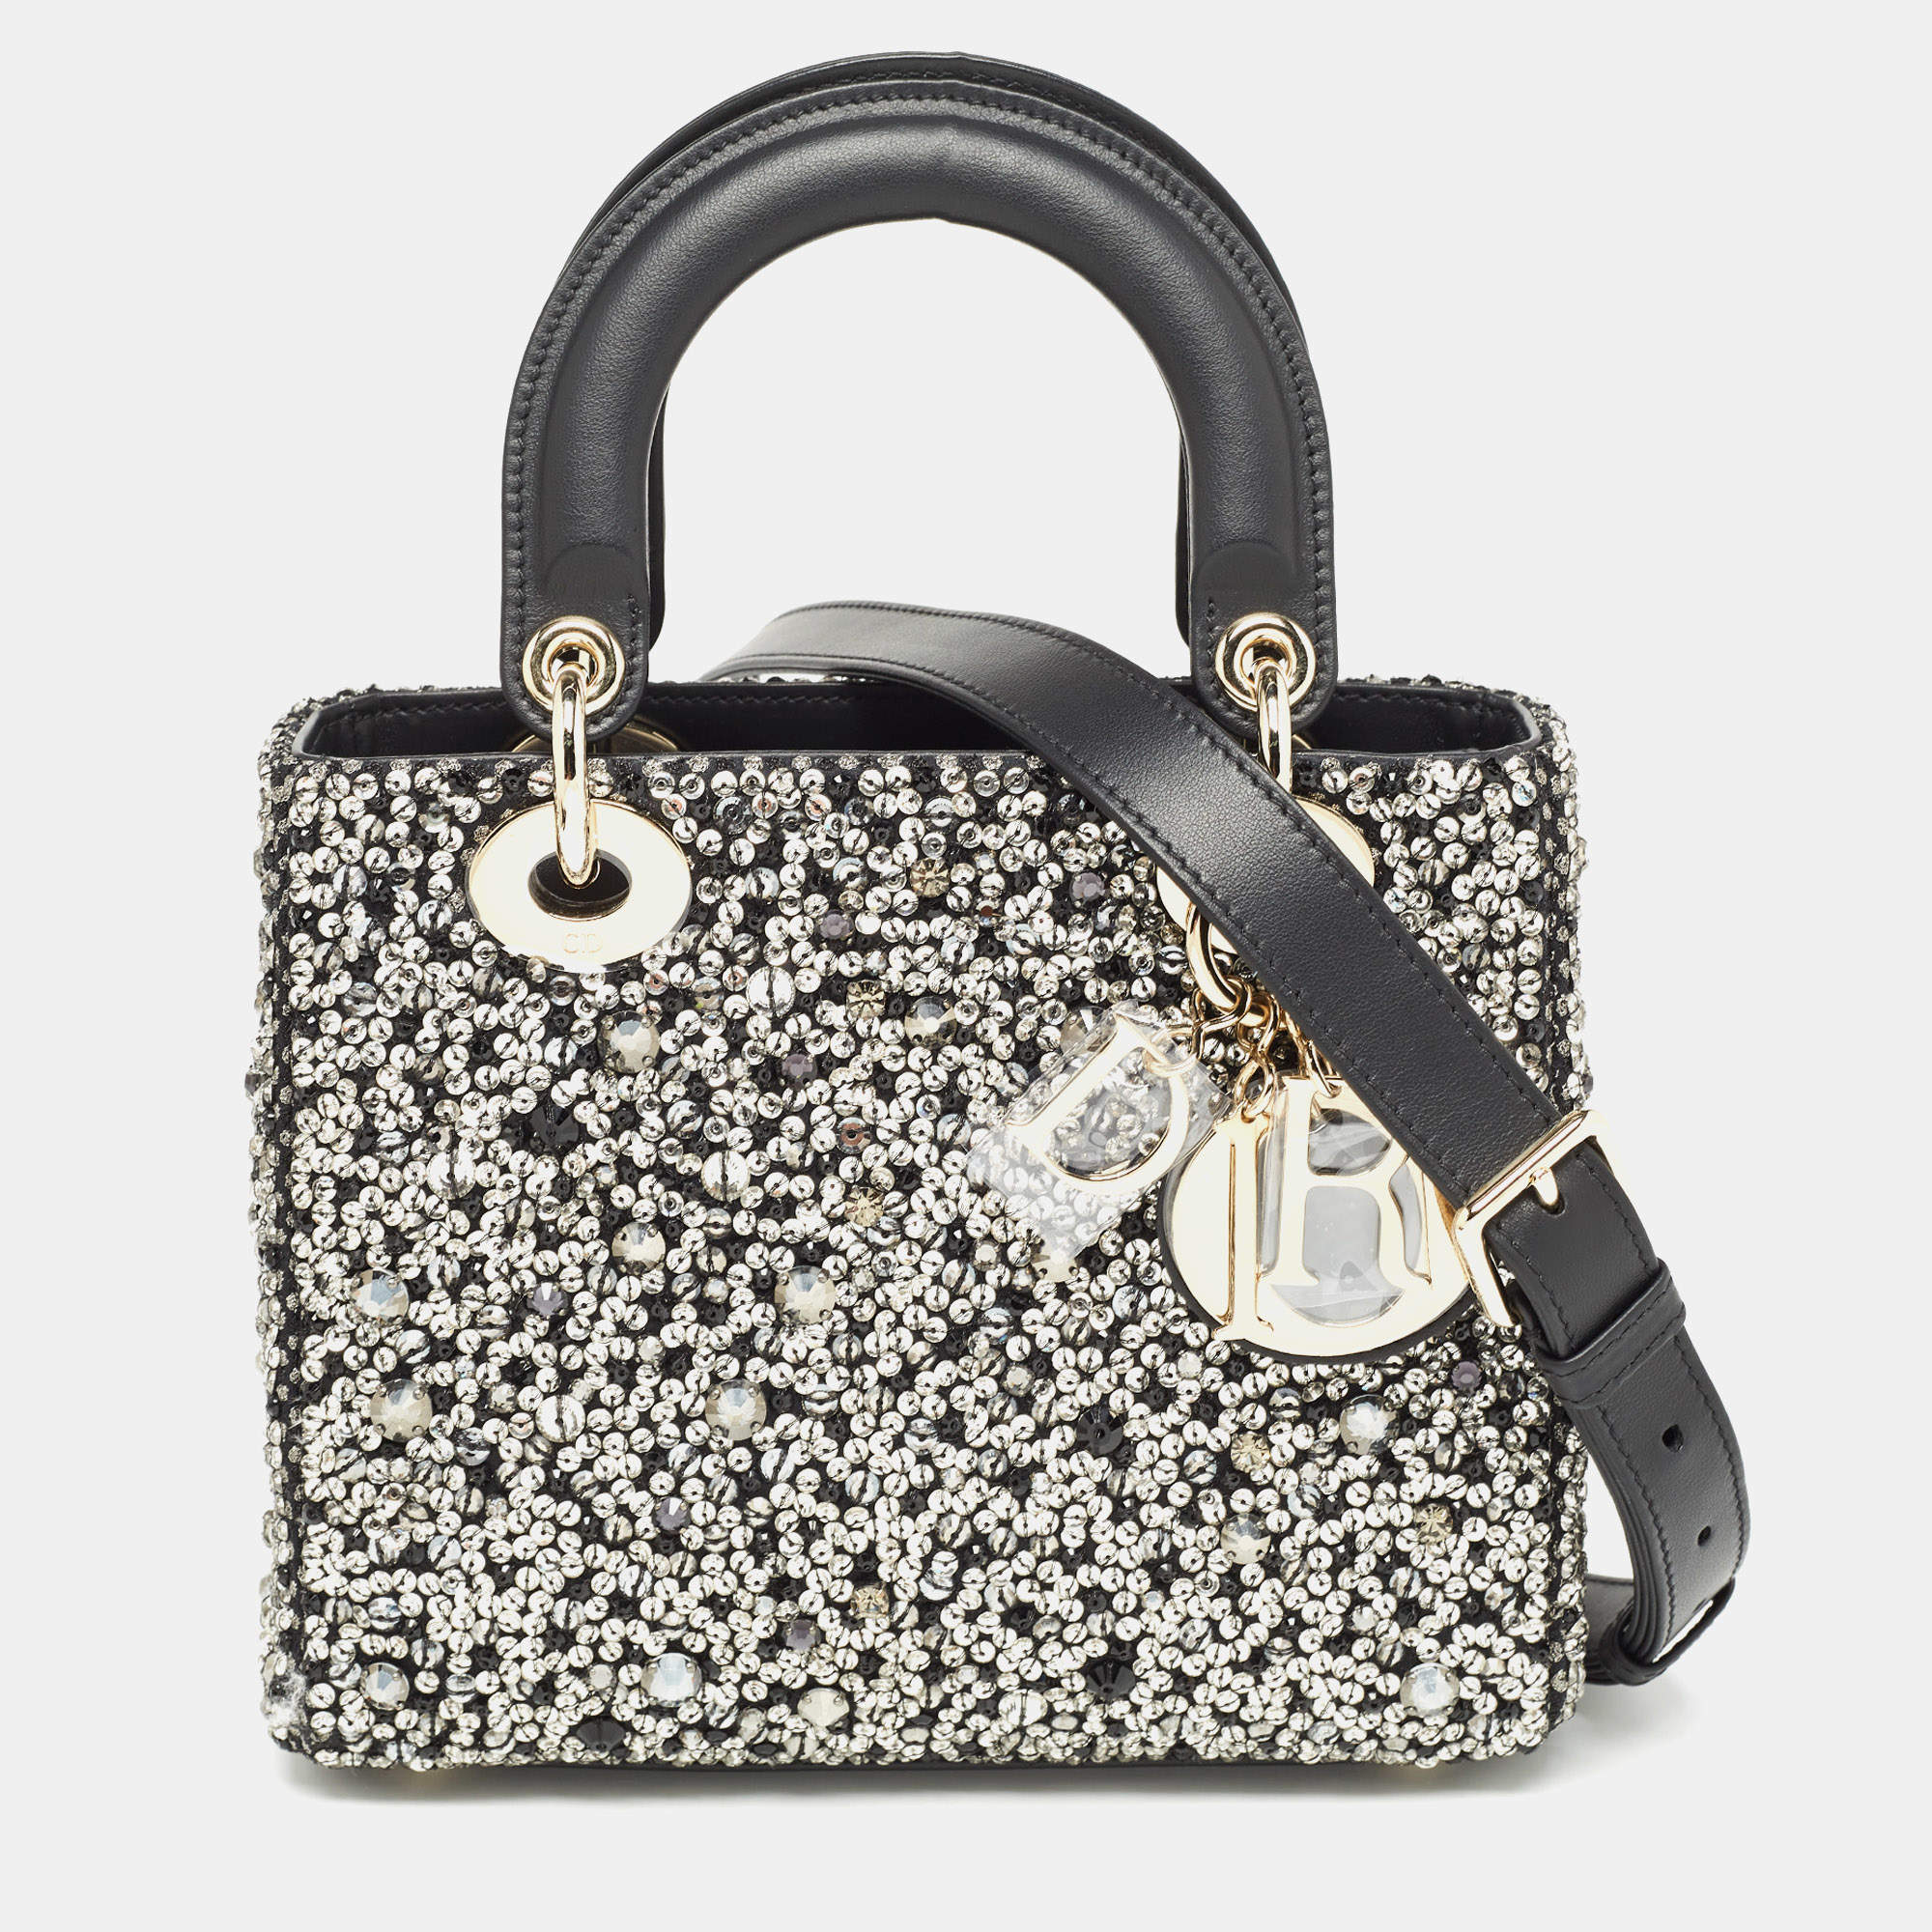 Dior Black Leather Sequins and Crystal Embellished Small Lady Dior Tote